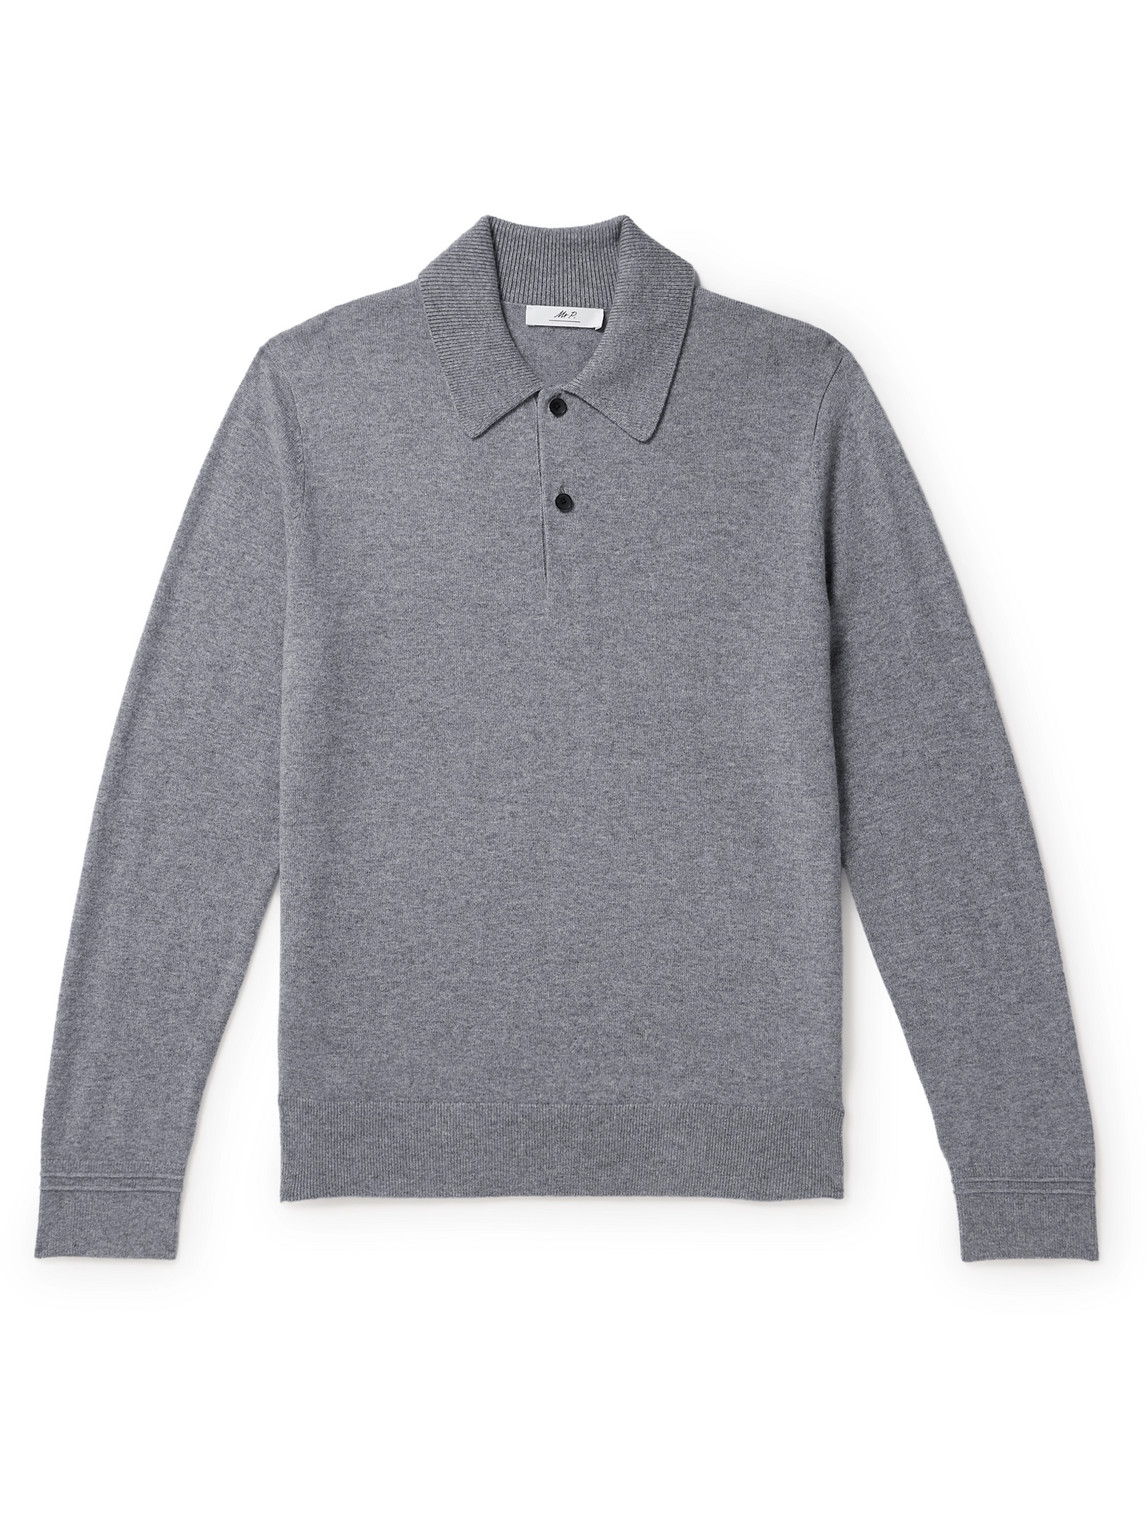 Mr P Cashmere Polo Shirt In Grey